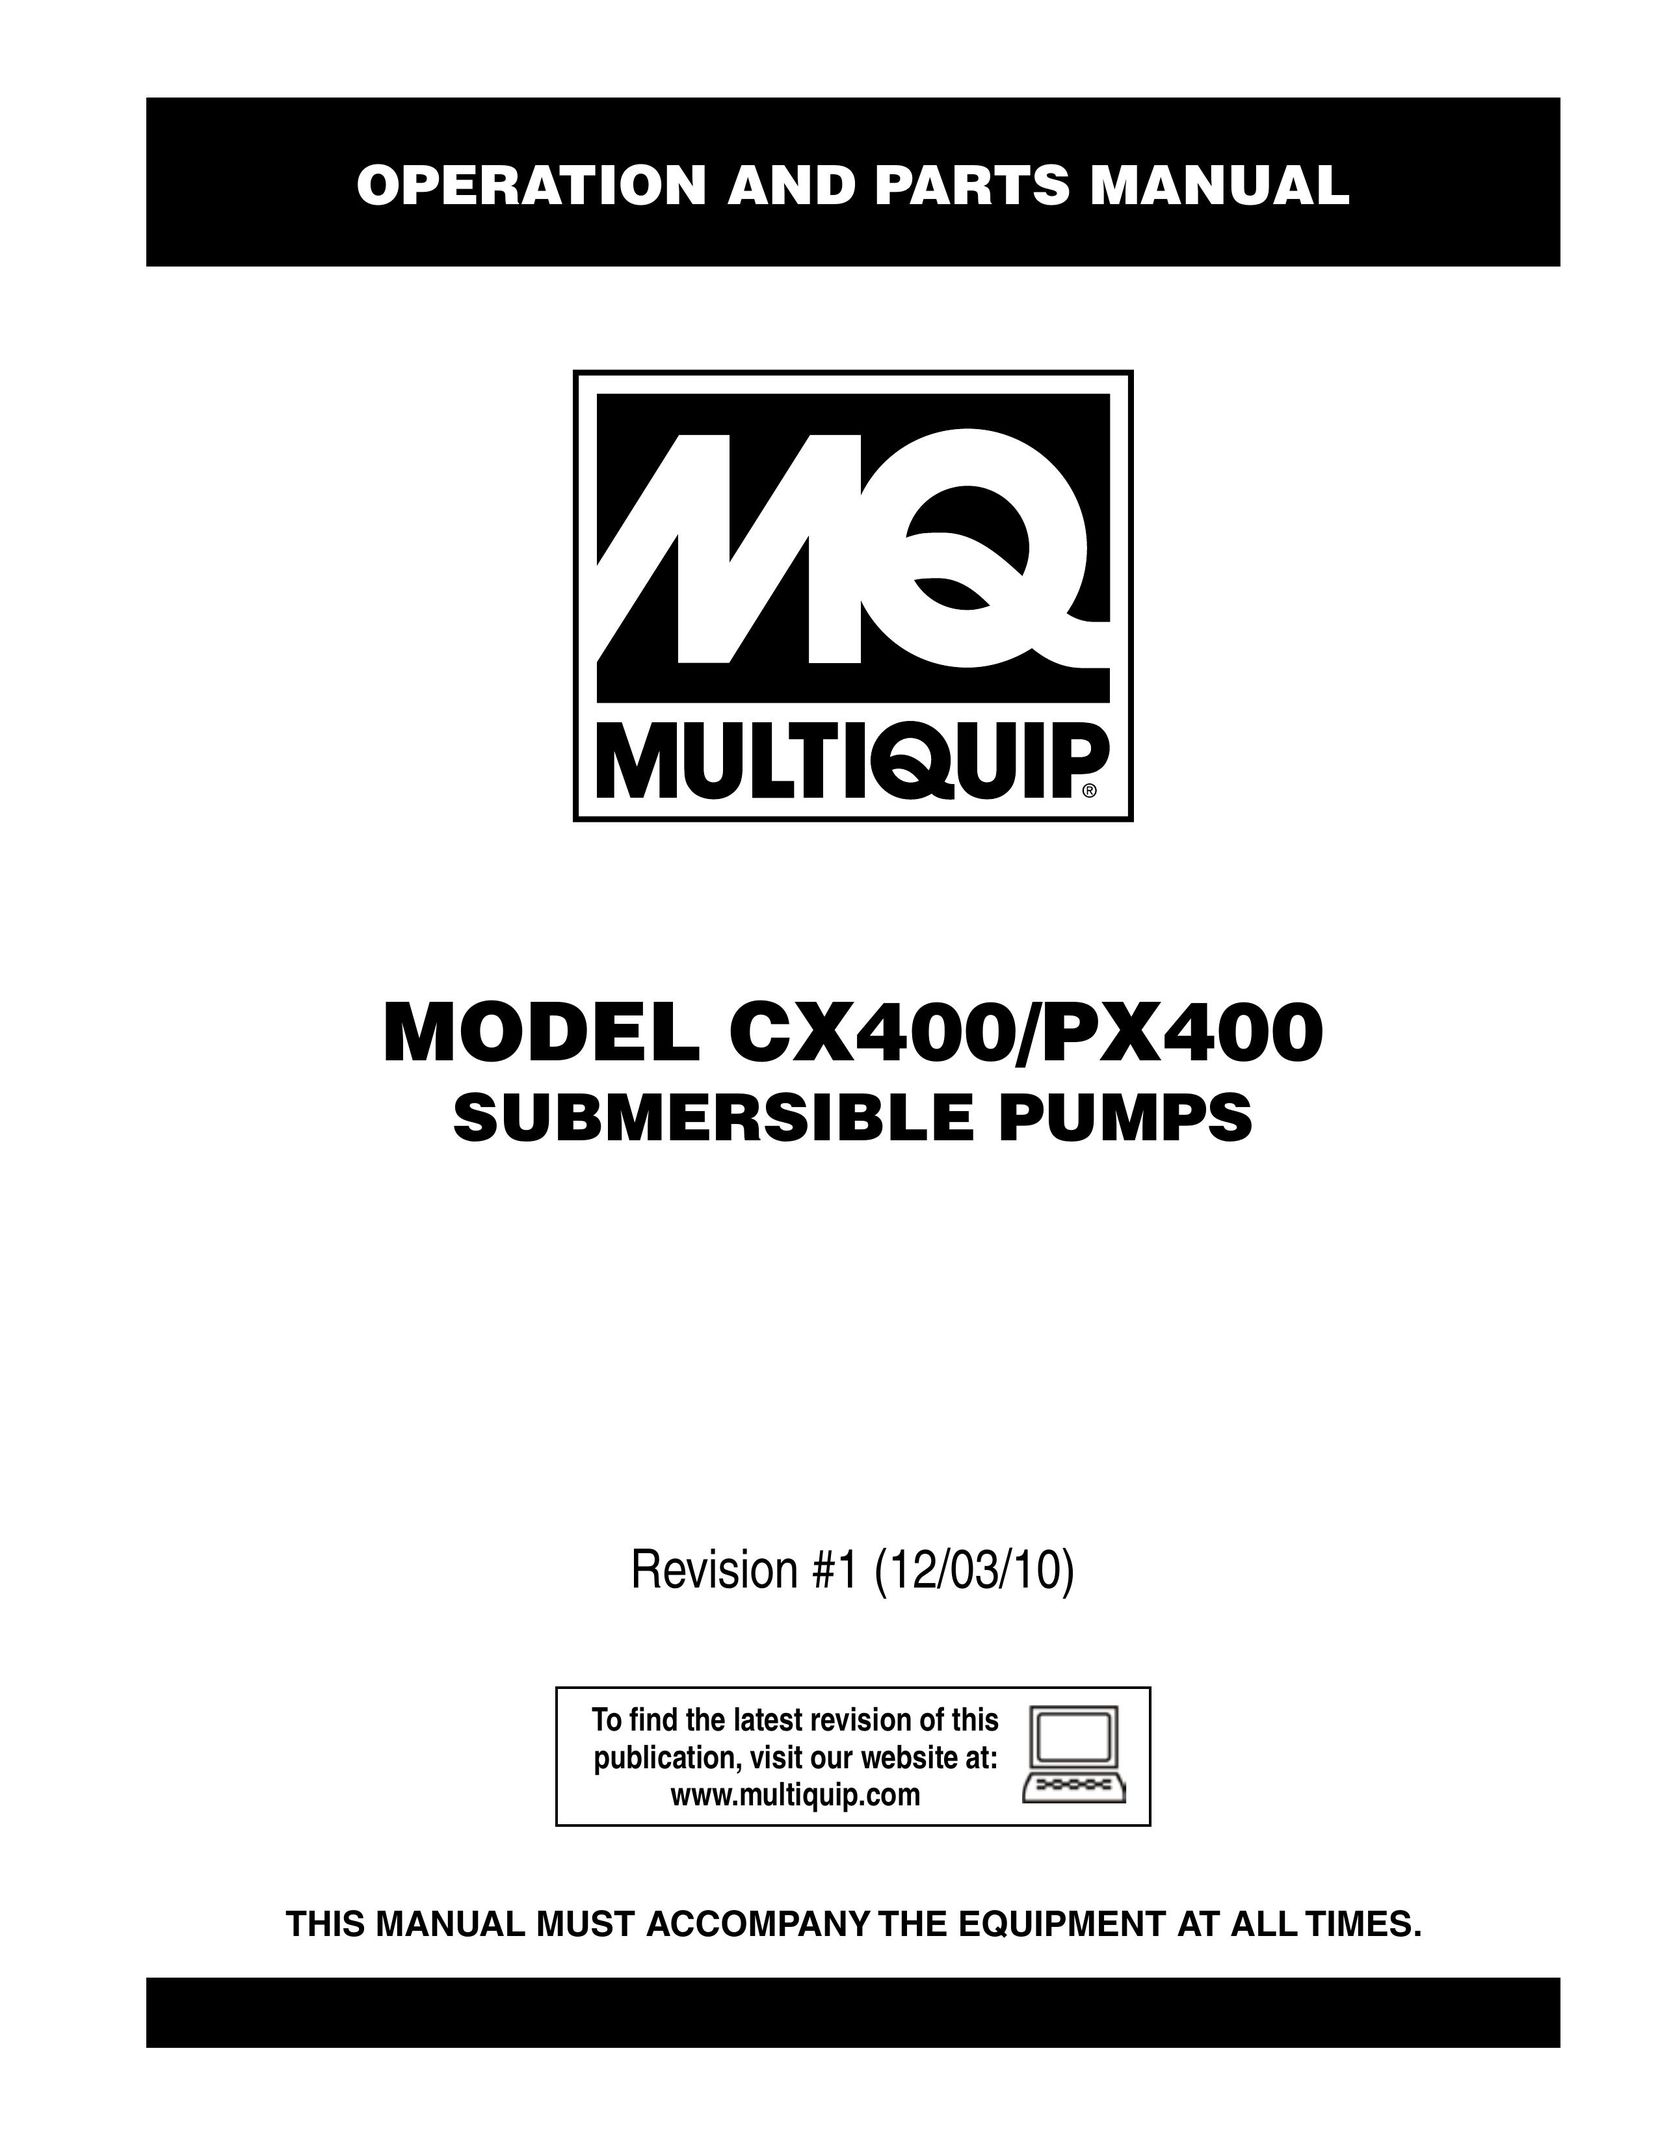 Multiquip px400 Septic System User Manual